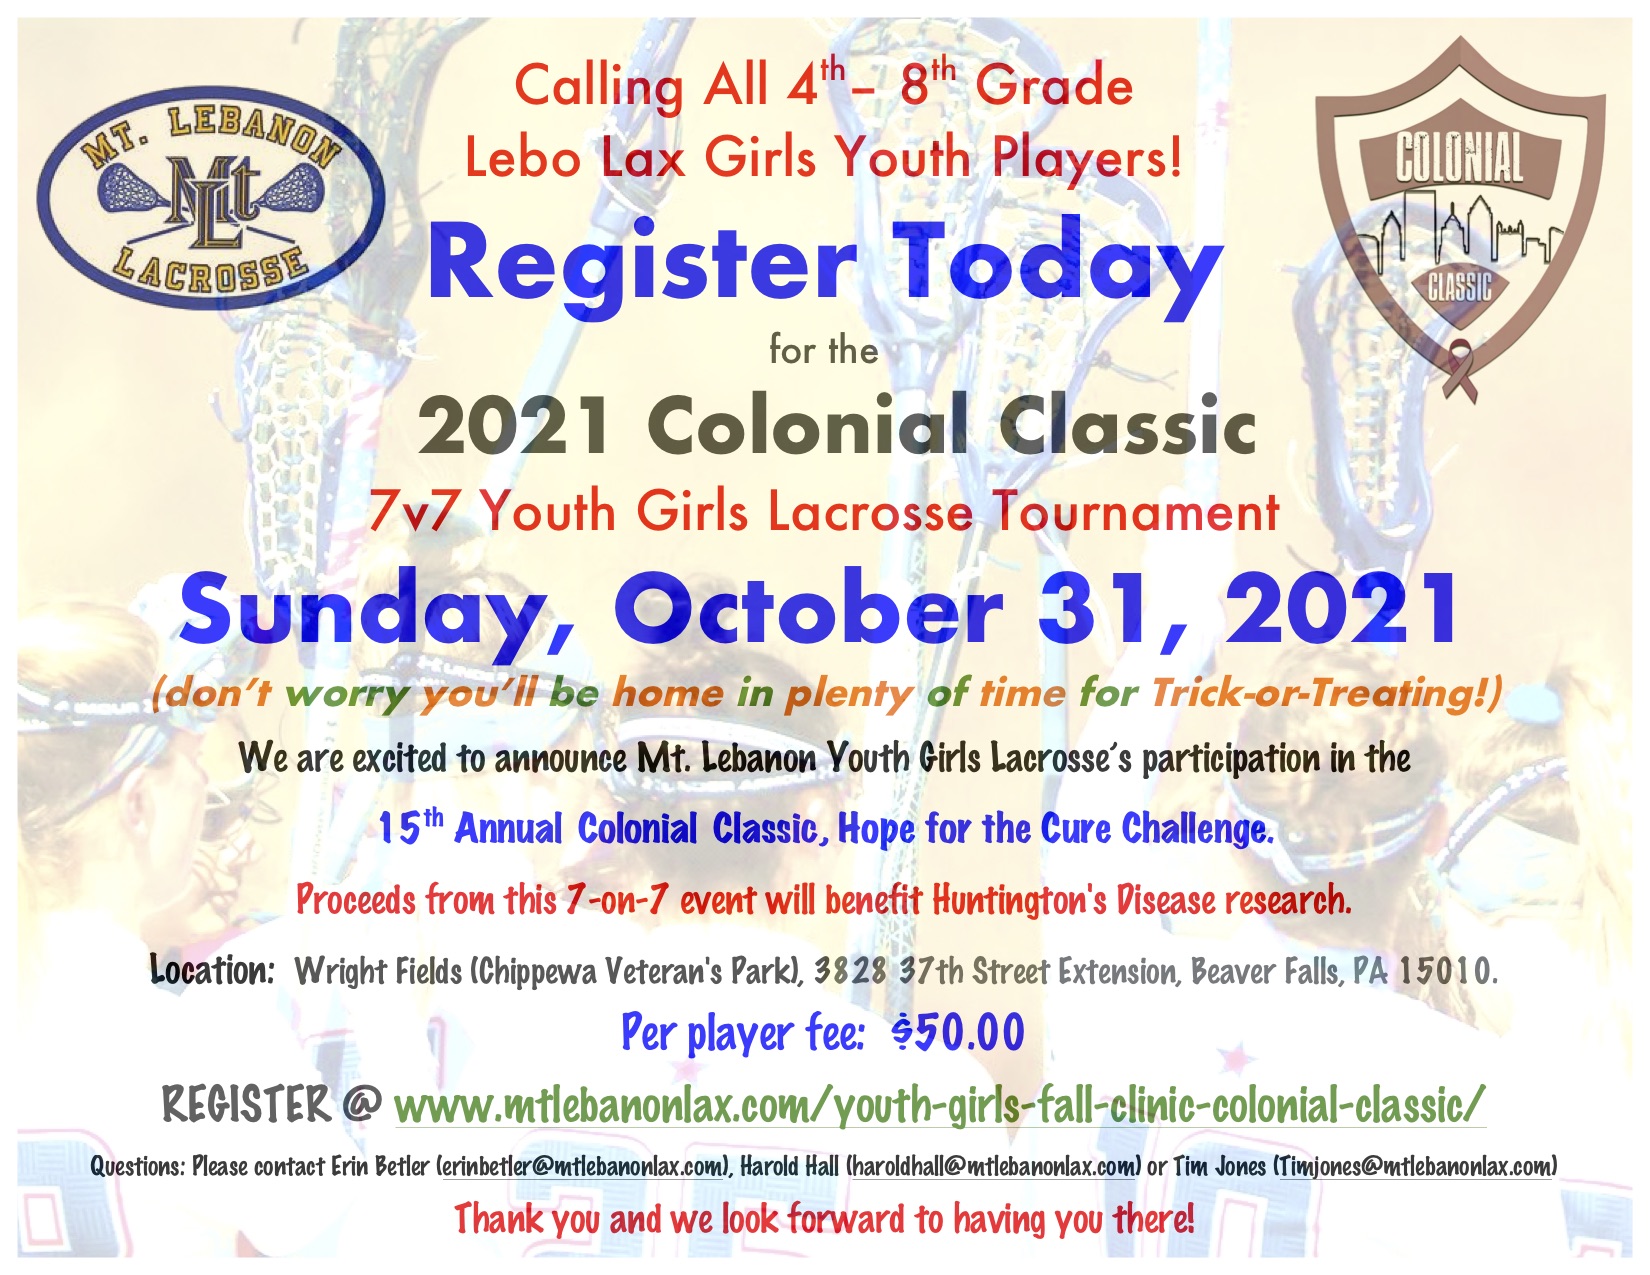 Colonial Classic 2021 - MTLLA Save the Date